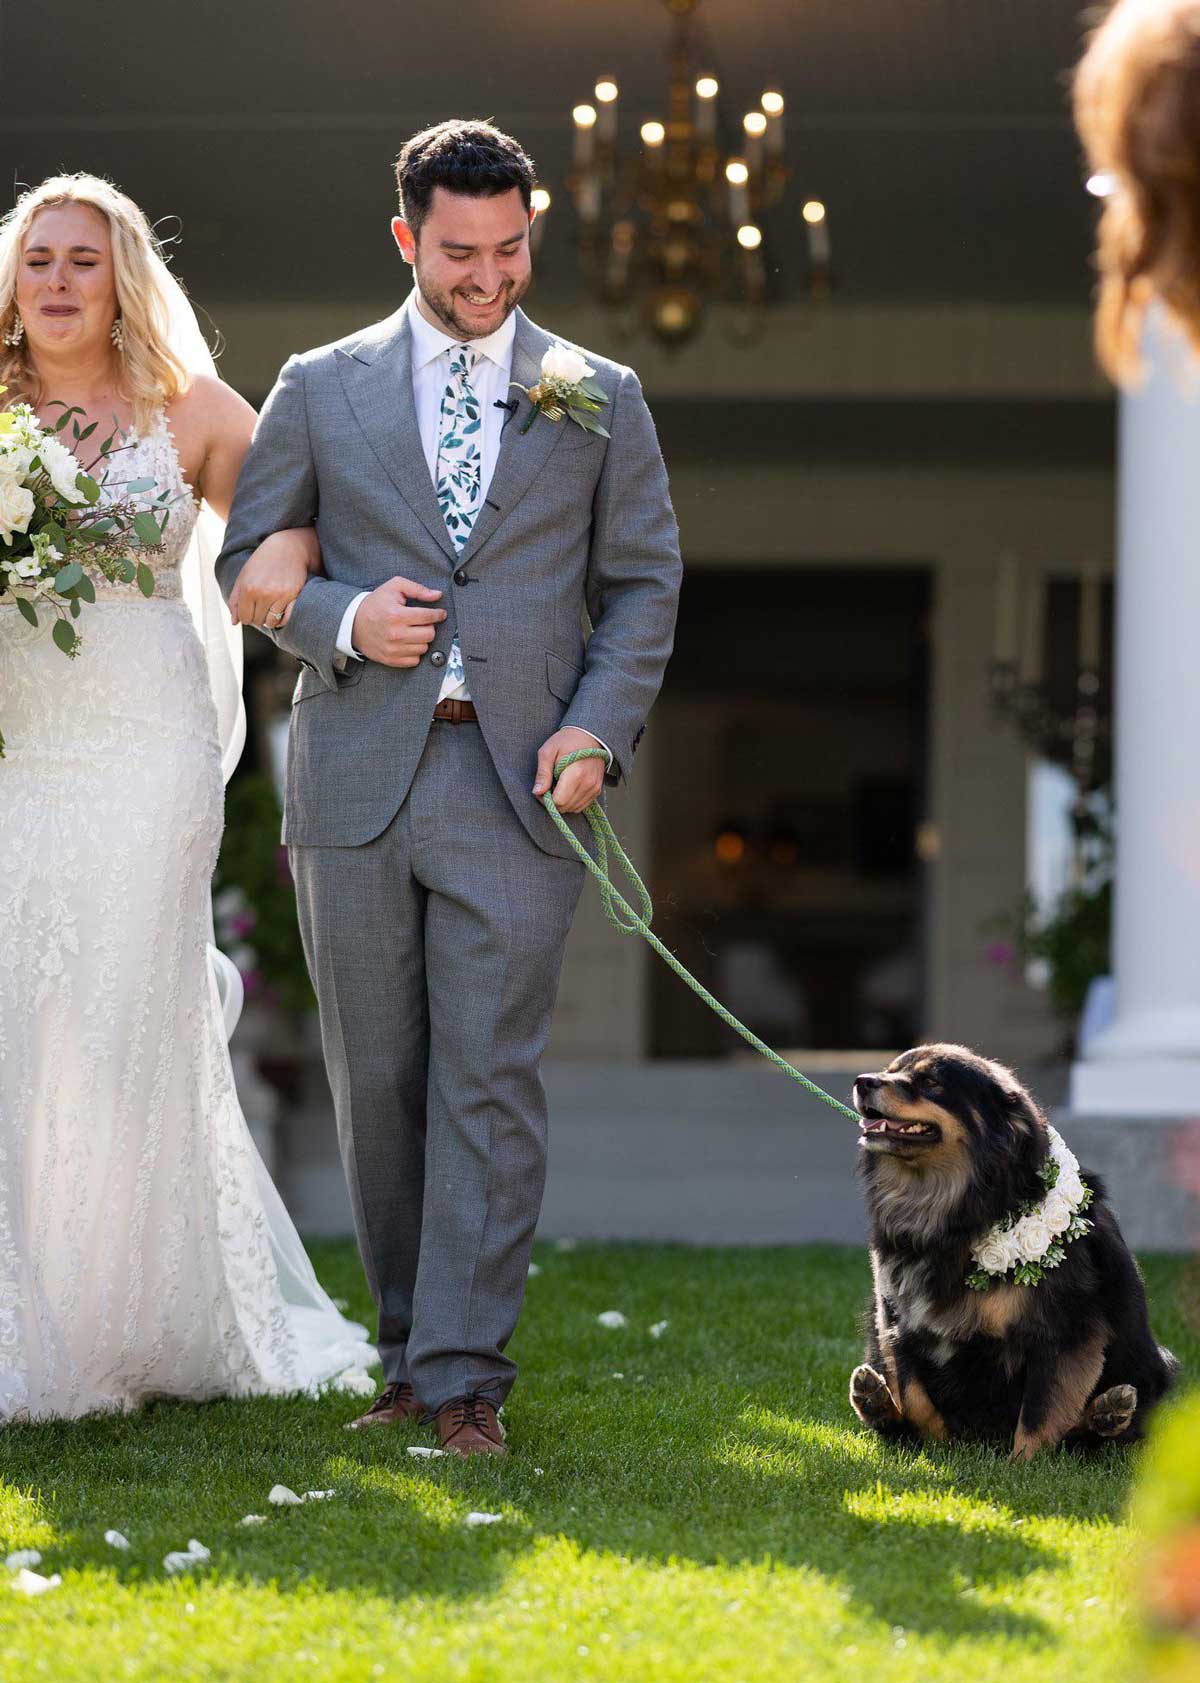 Got married last week, our dog decided to steal the show by scooting his butt down the isle